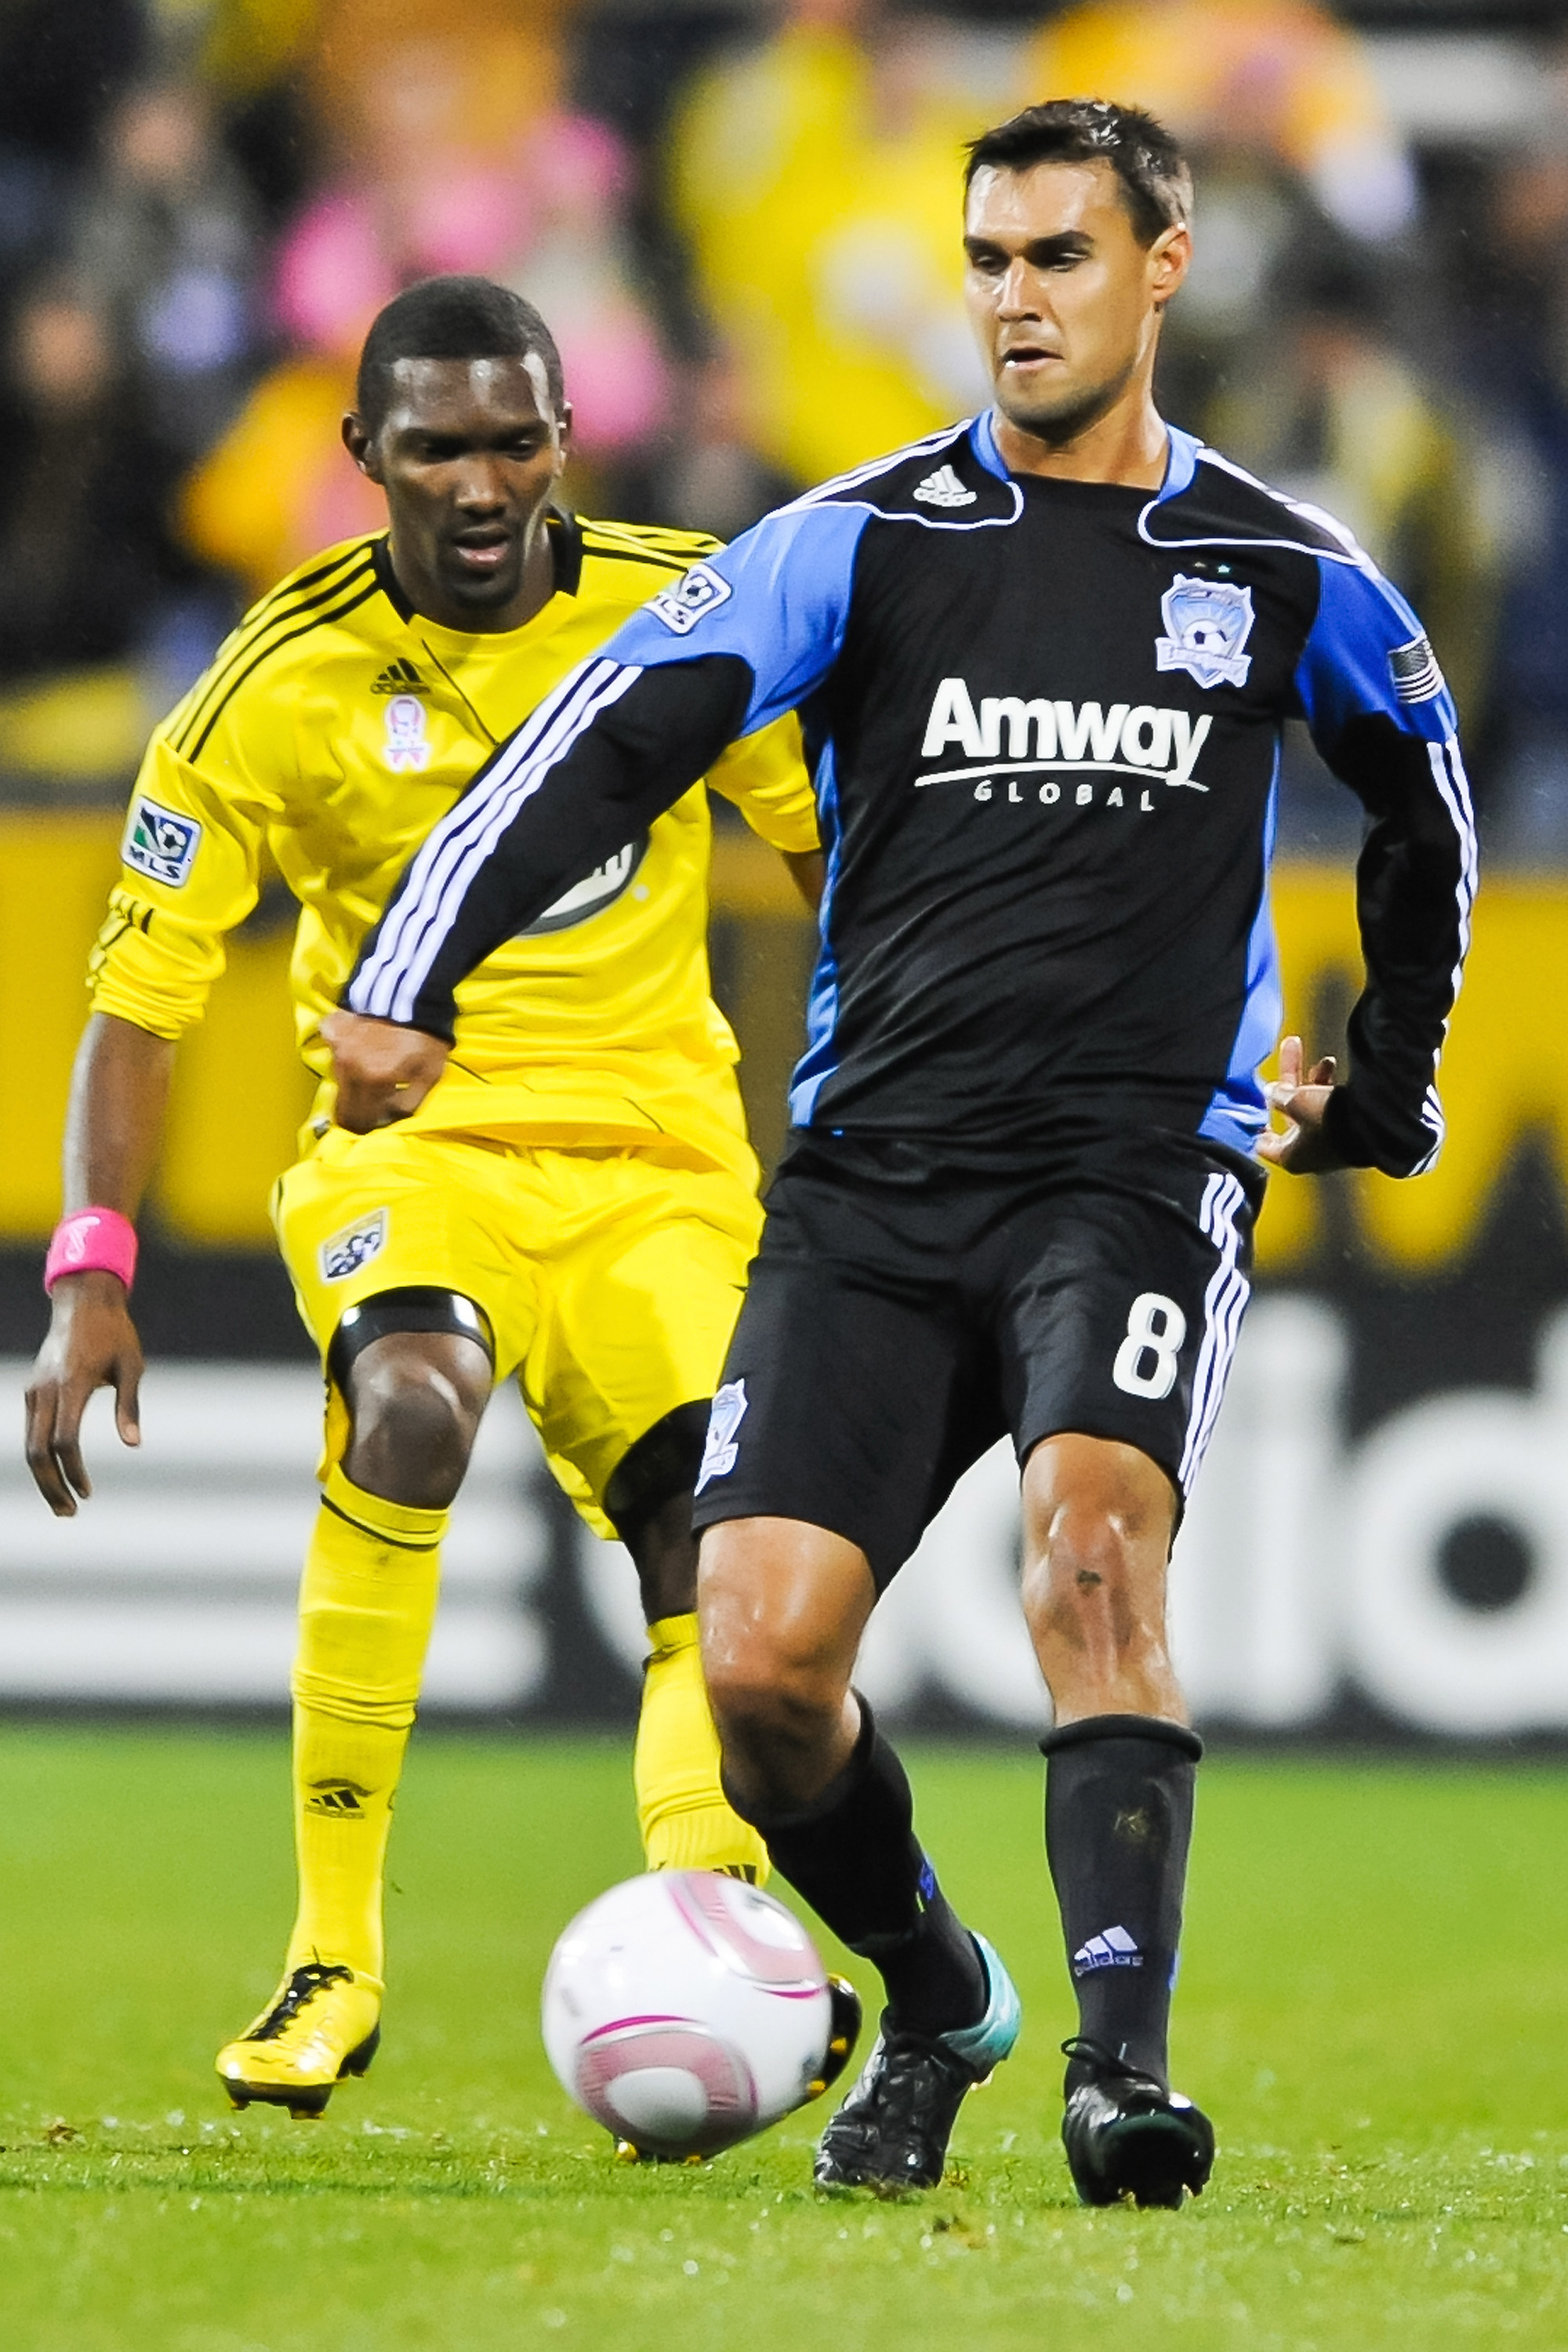 COLUMBUS, OH - OCTOBER 2:  Chris Wondolowski #8 of the San Jose Earthquakes controls the ball against the Columbus Crew on October 2, 2010 at Crew Stadium in Columbus, Ohio.  (Photo by Jamie Sabau/Getty Images)